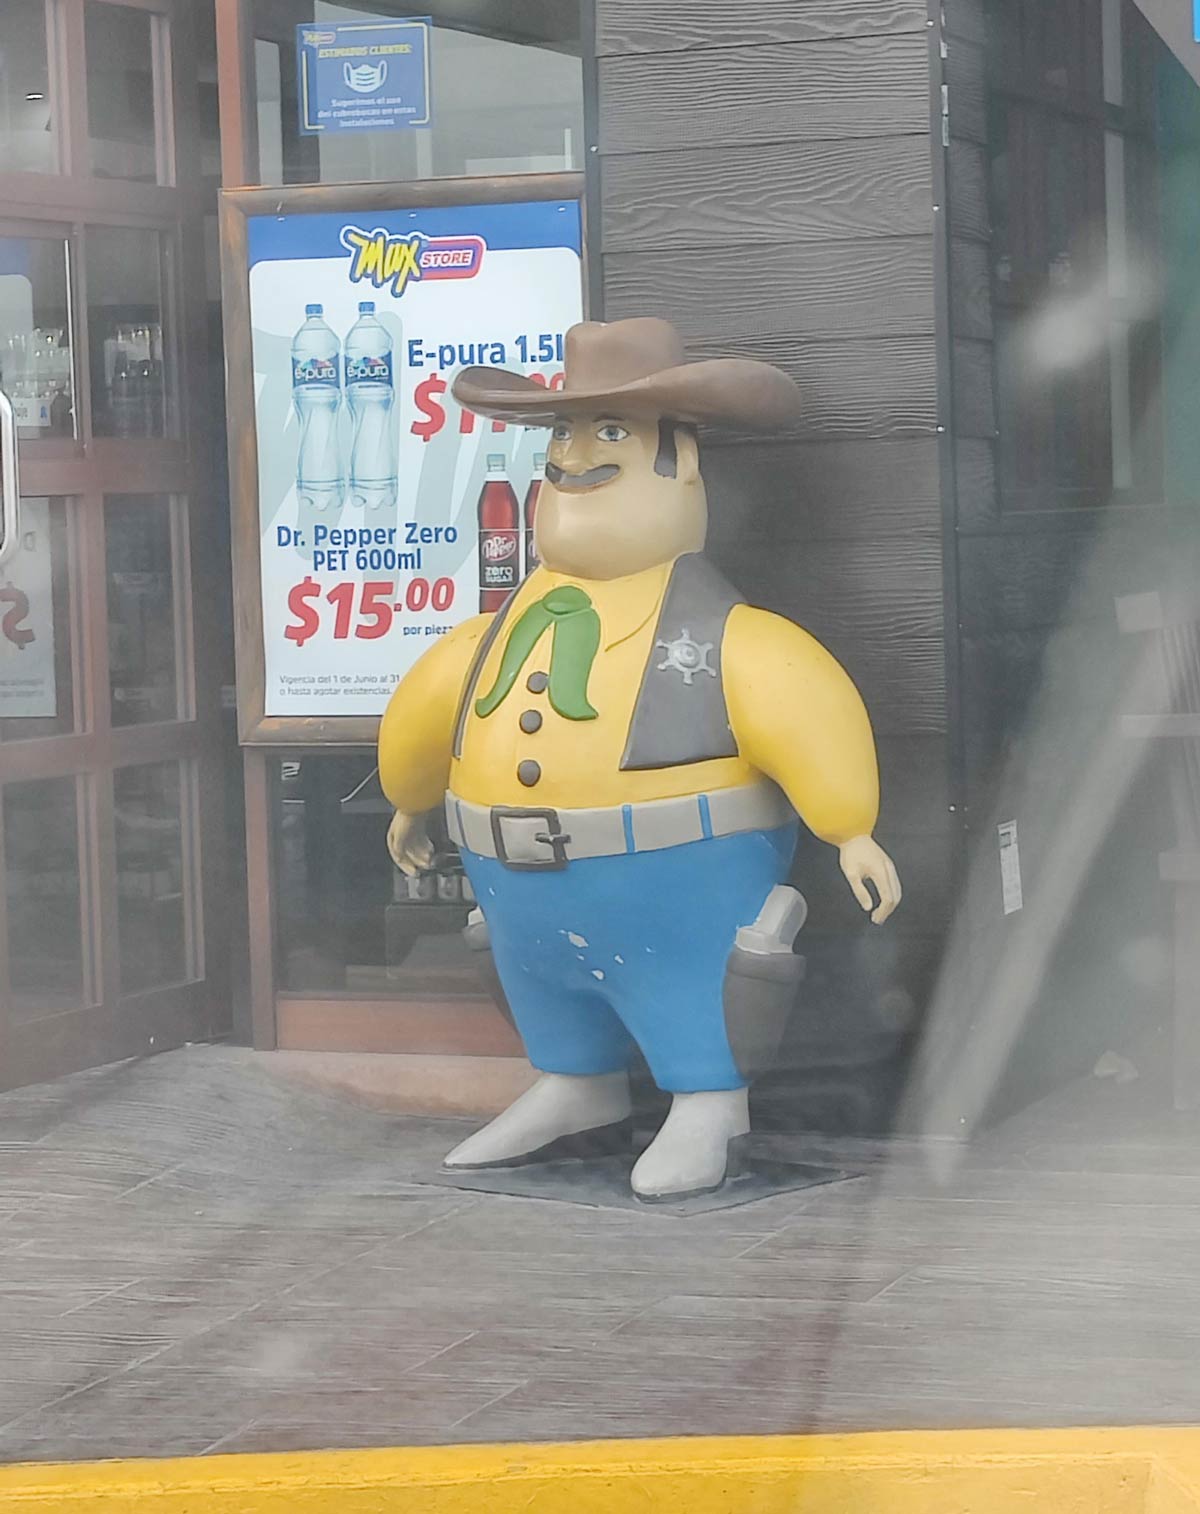 Woody really let himself go